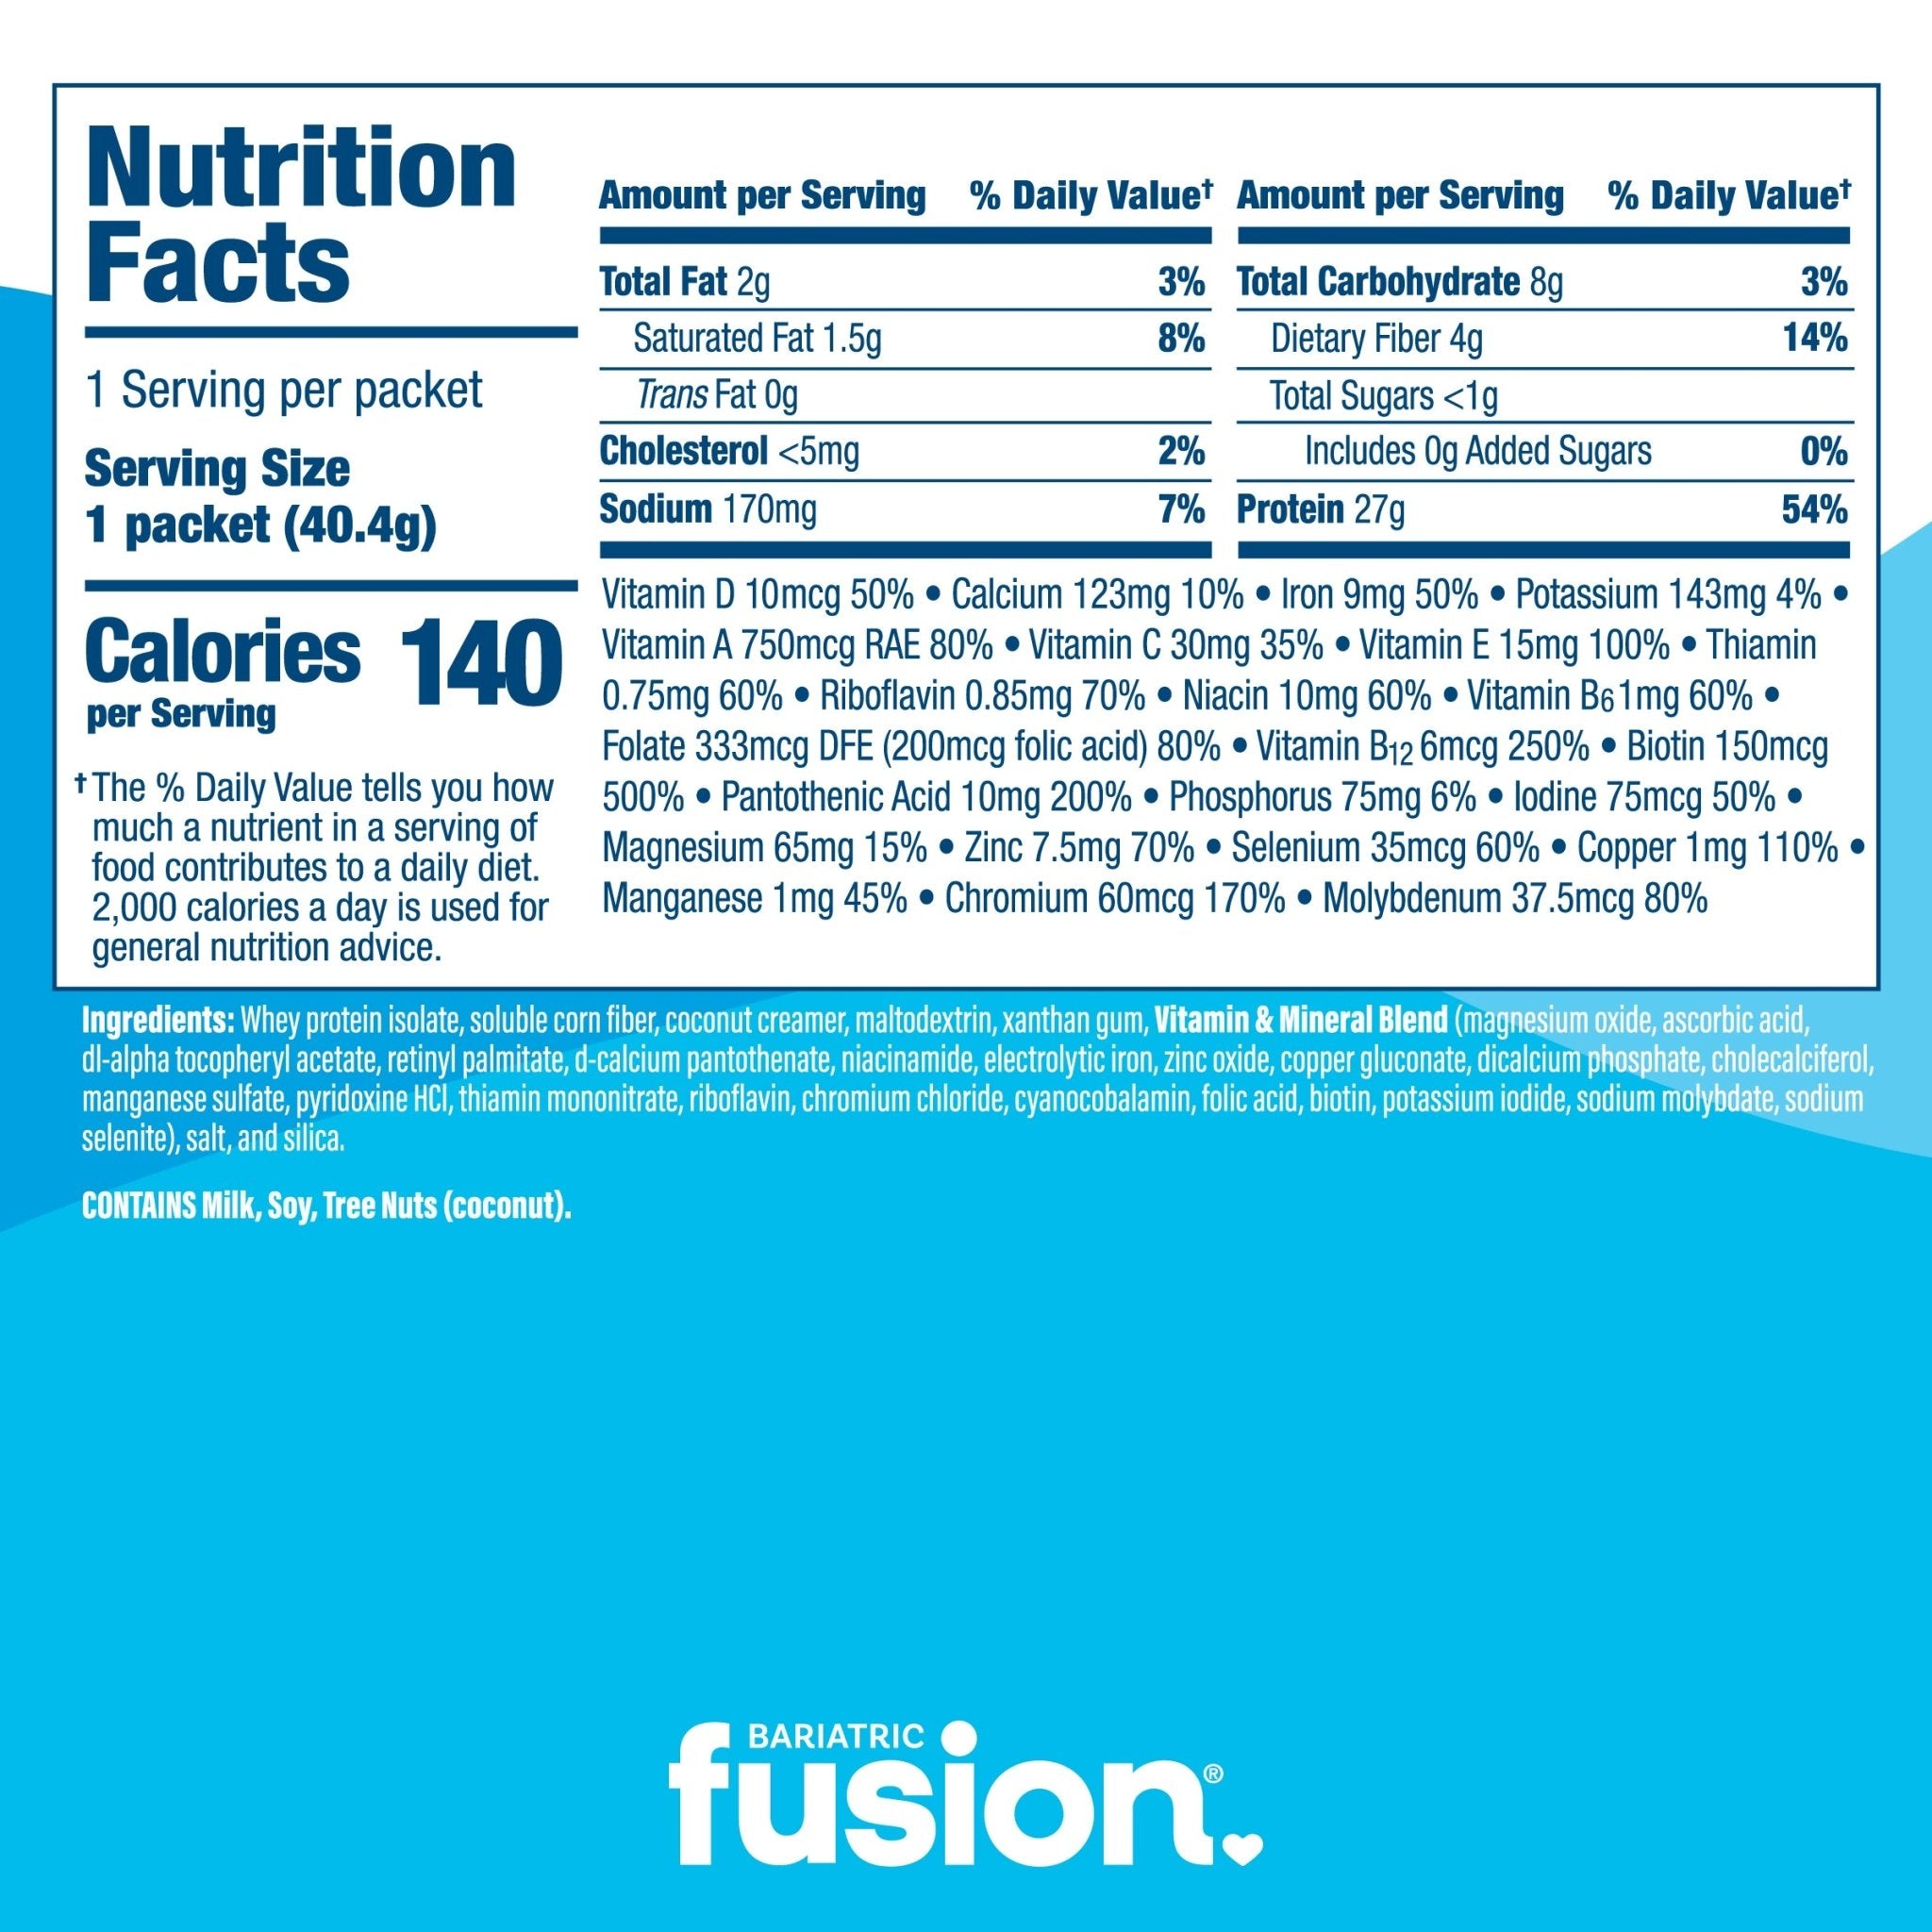 Bariatric Fusion Unflavored High Protein Meal Replacement single serving nutrition facts.